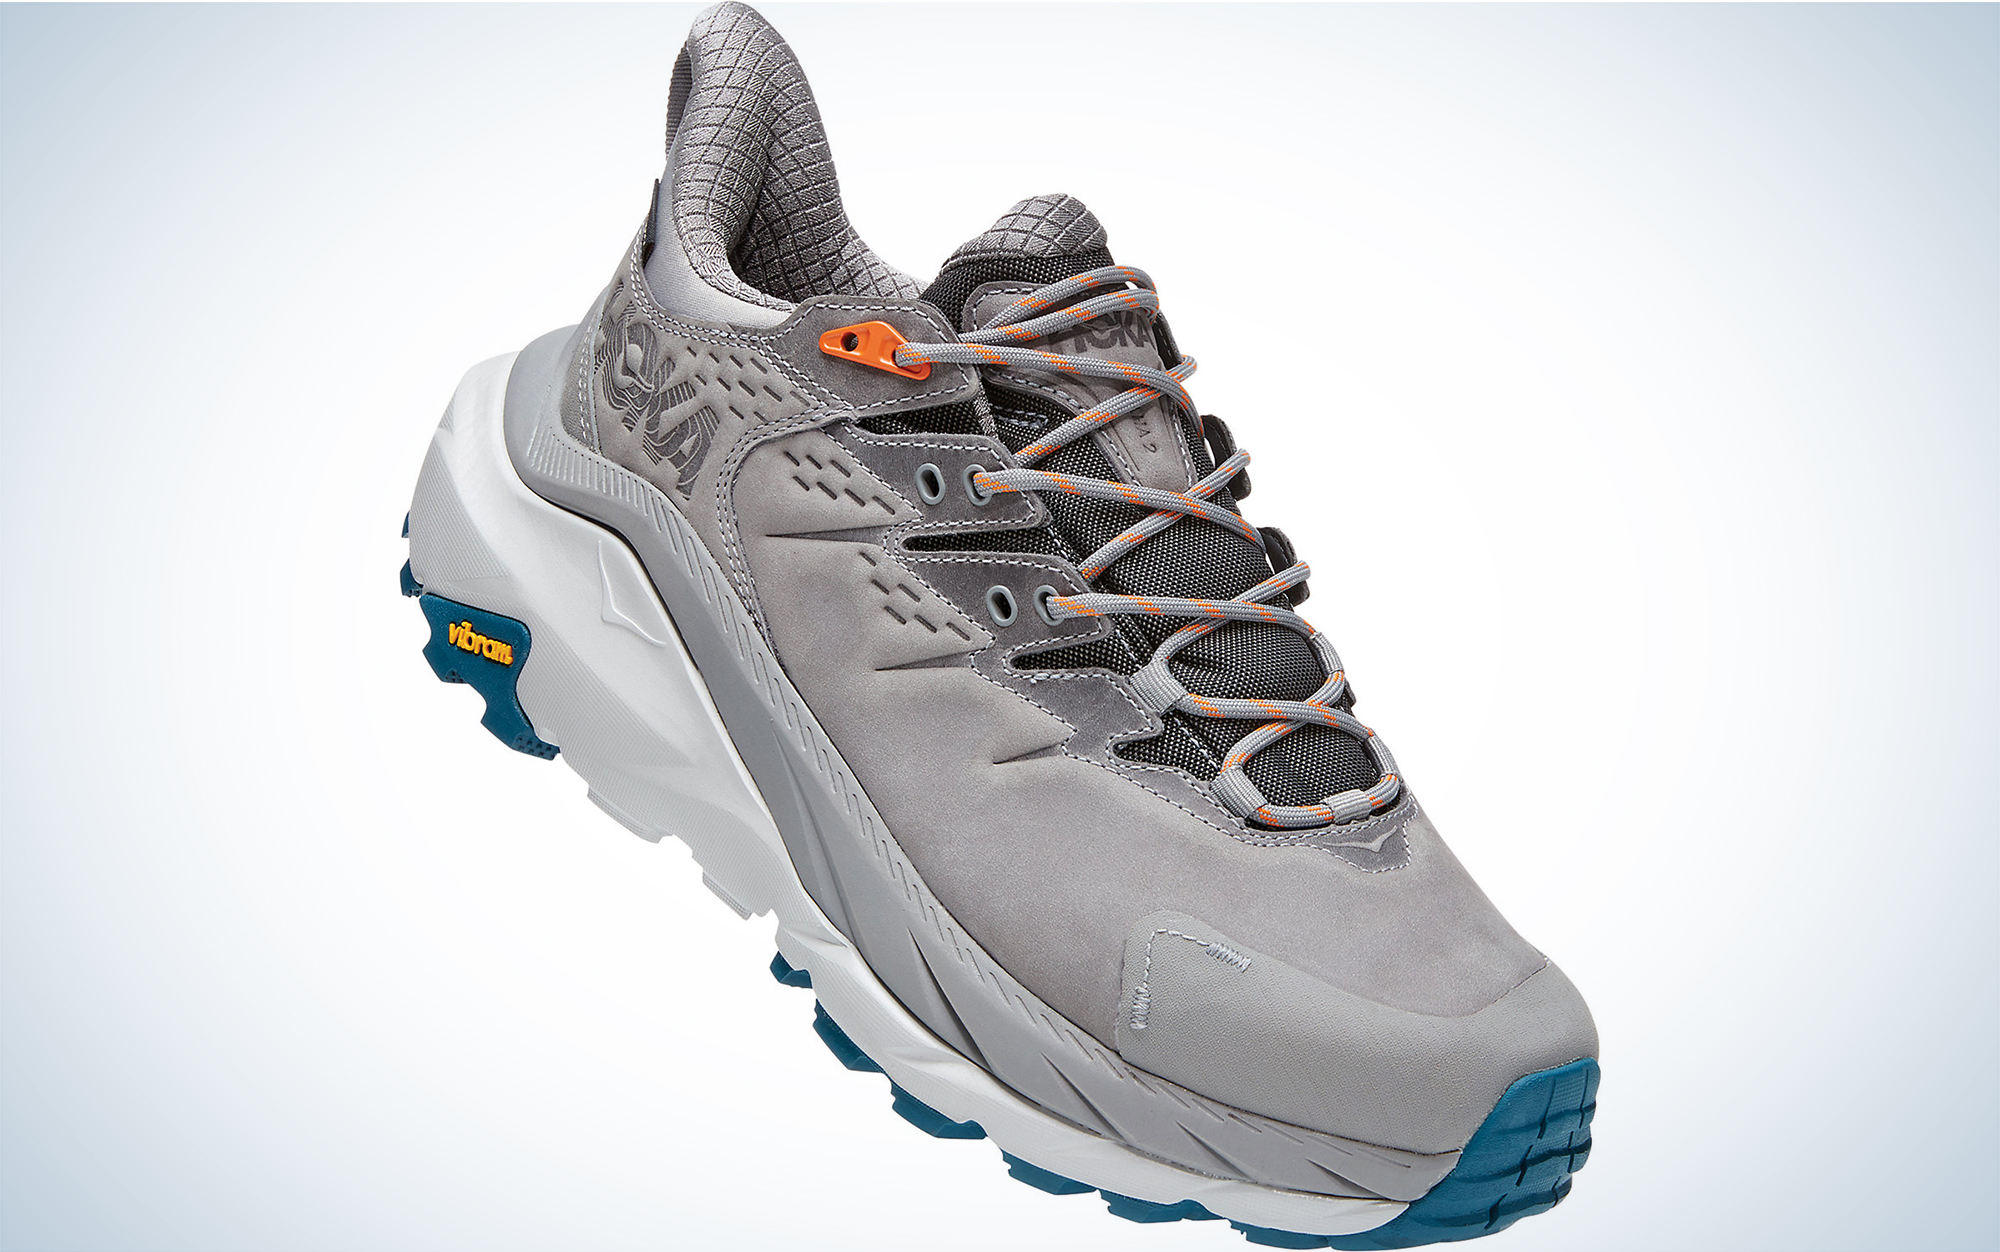 The Hoka One One Men's Kaha 2 Low GTX is one of the best men's hiking shoes.